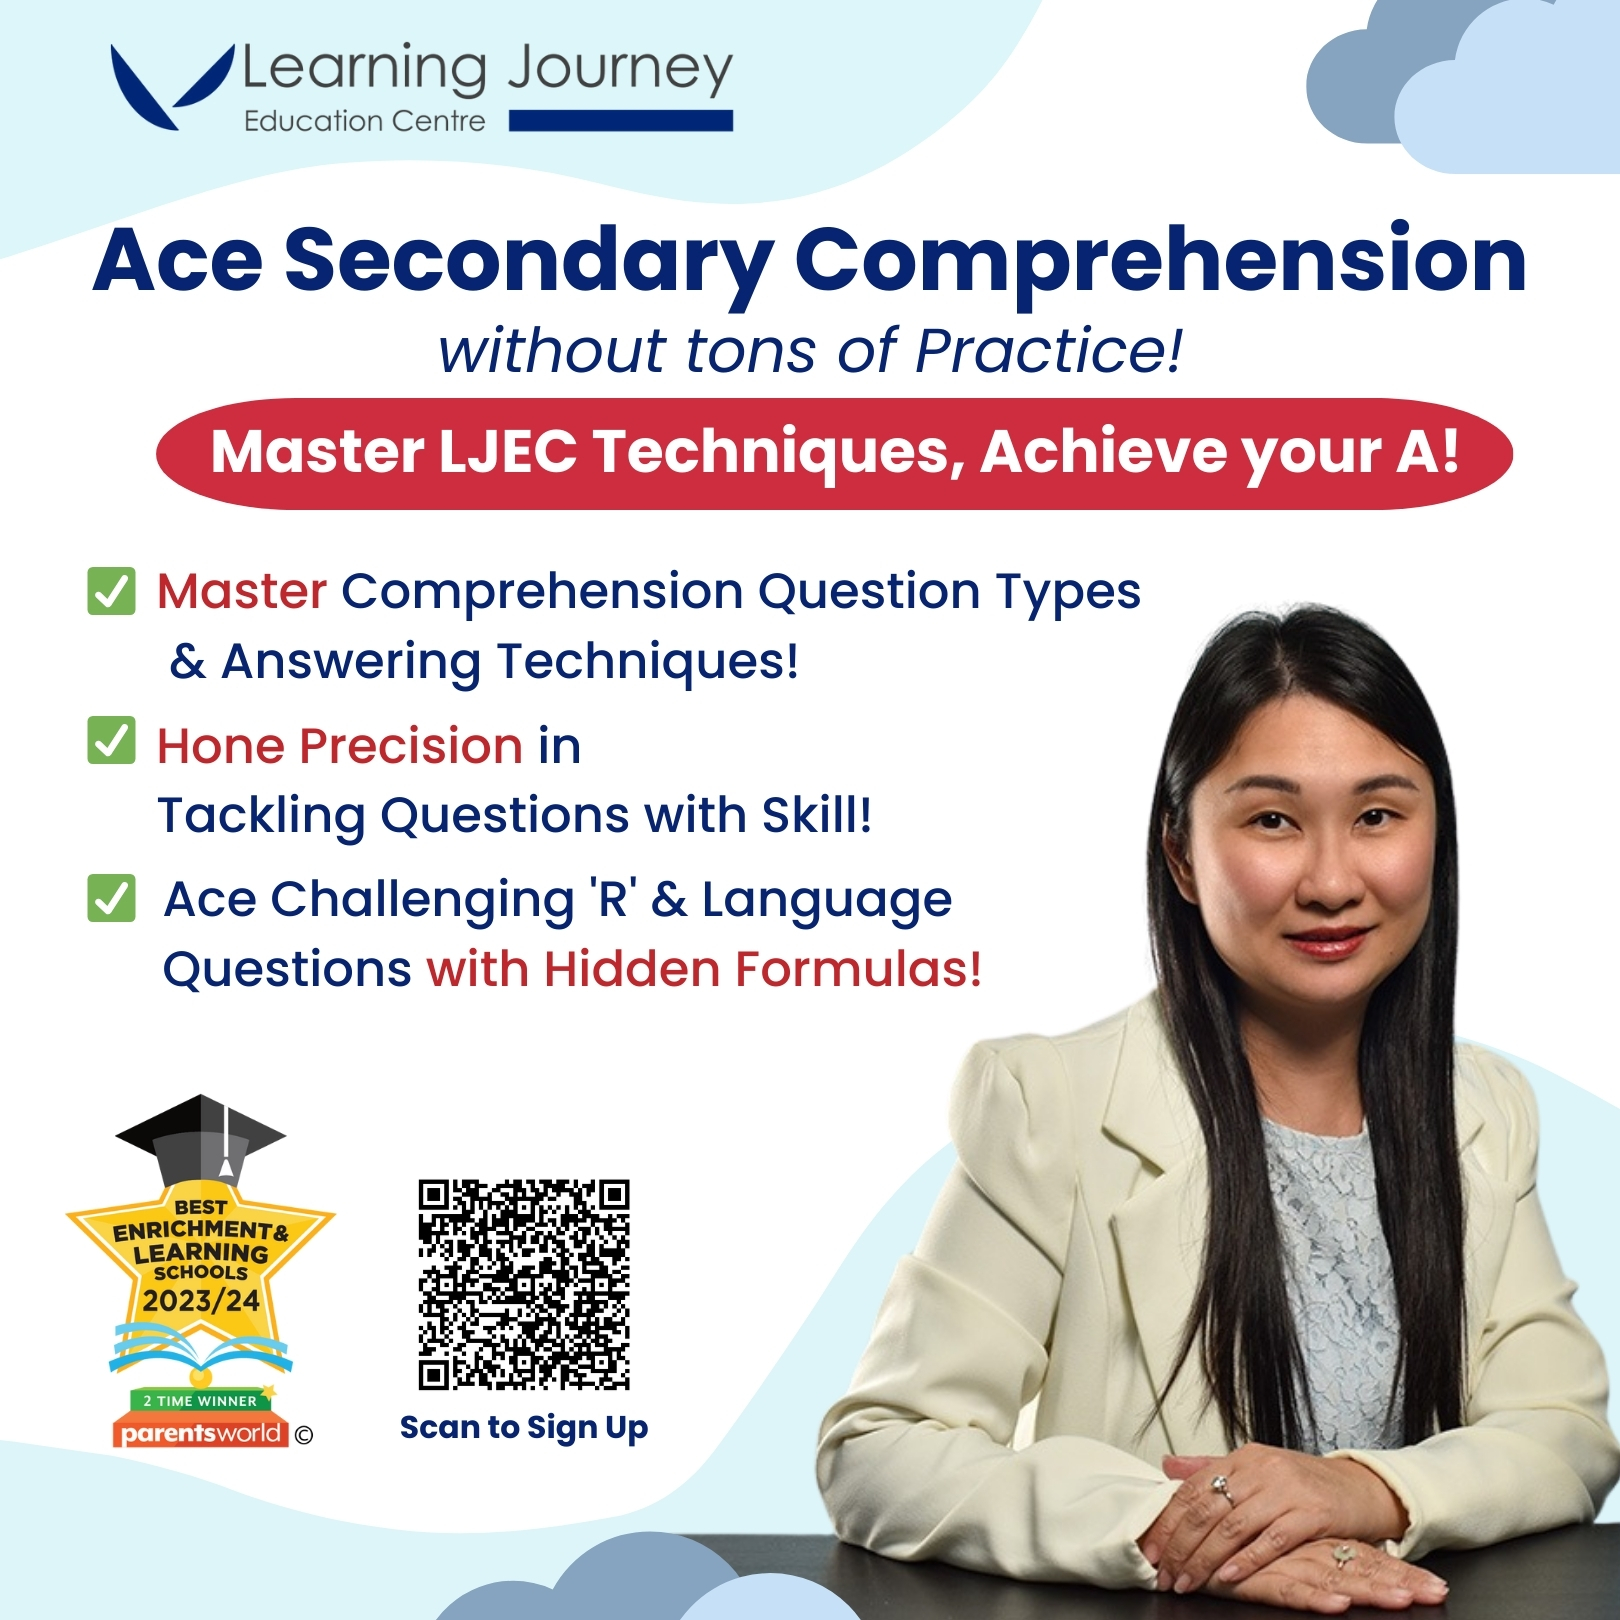 Ace Comprehension without tons of Practice! Master LJEC Techniques, Achieve your A!